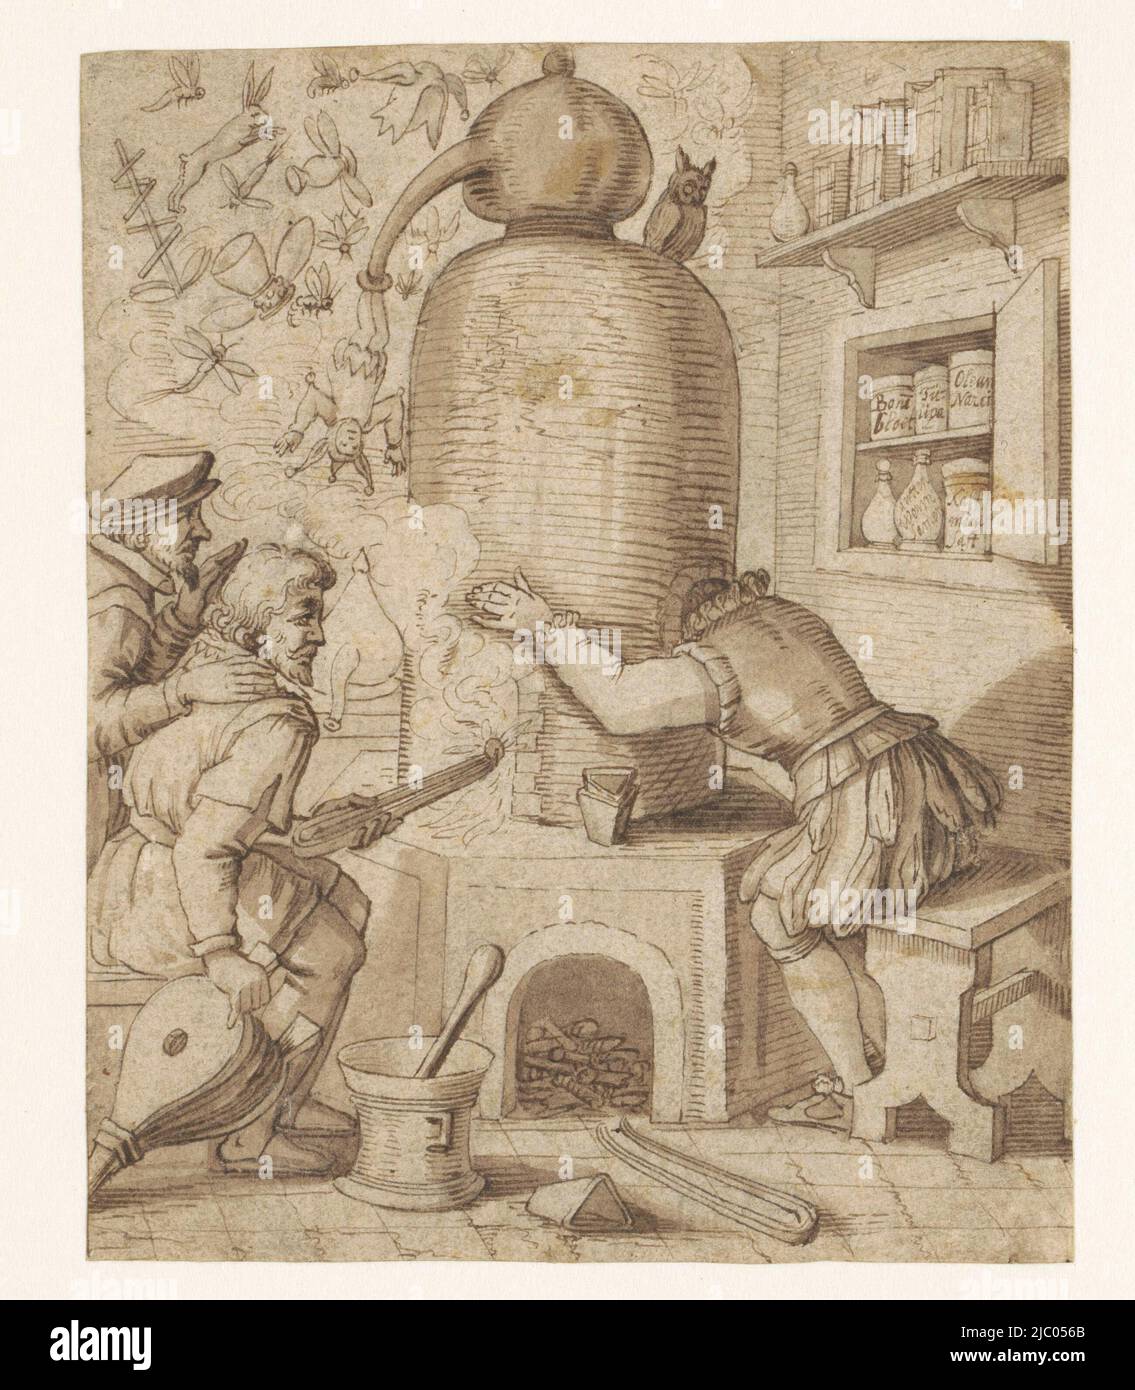 Satire on alchemy, anonymous, 1600 - 1610, draughtsman: anonymous, Low Countries, 1600 - 1610, paper, pen, brush, h 134 mm × w 108 mm Stock Photo